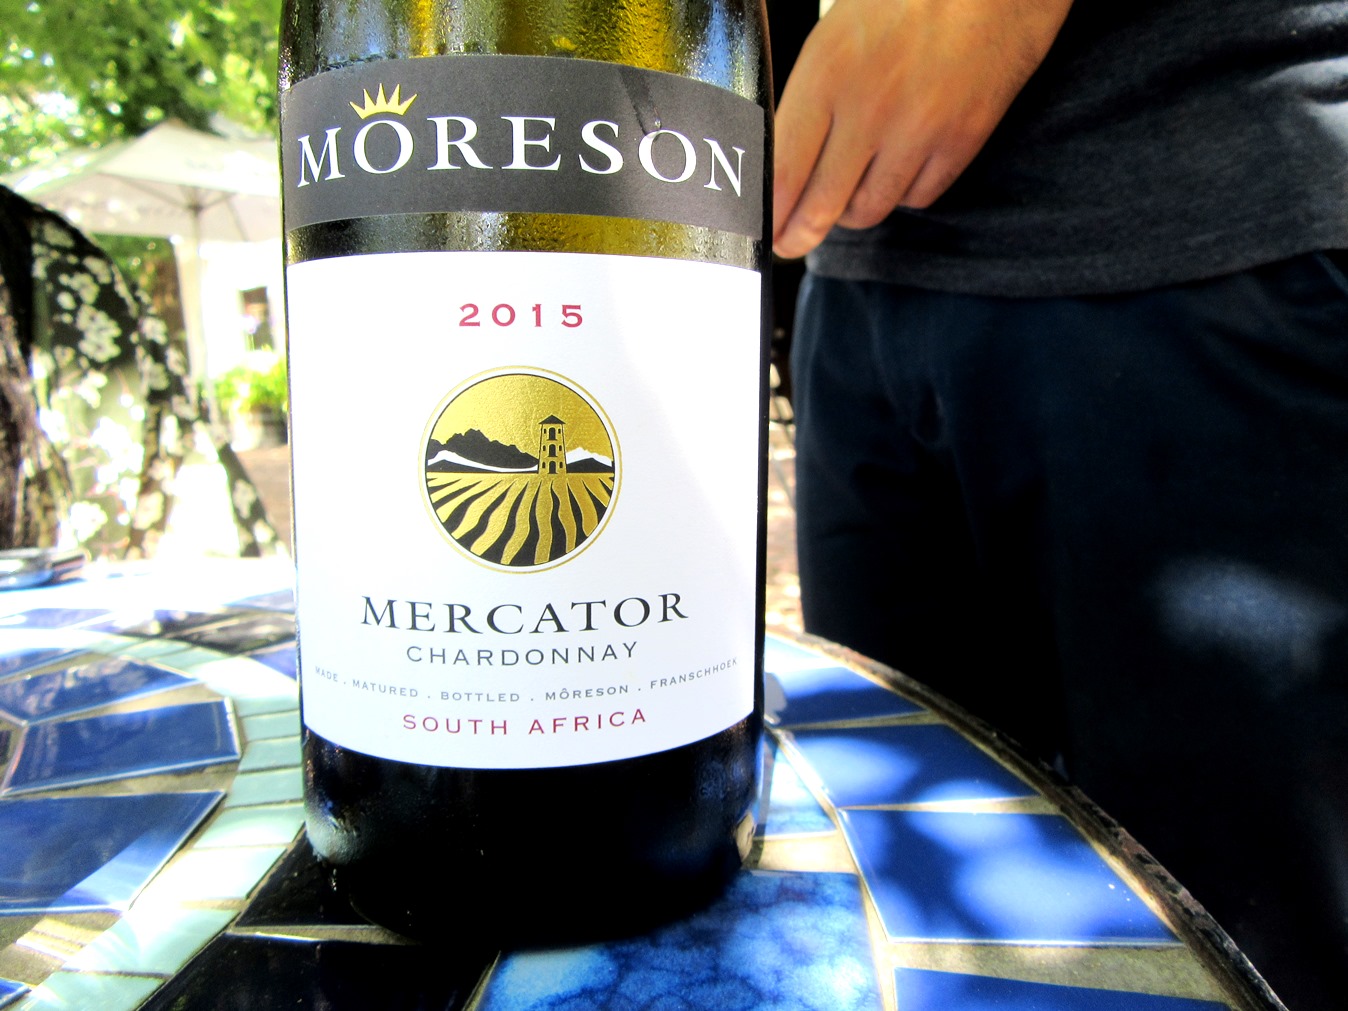 Moreson, Mercator Chardonnay 2015, Franschhoek, South Africa, Wine Casual